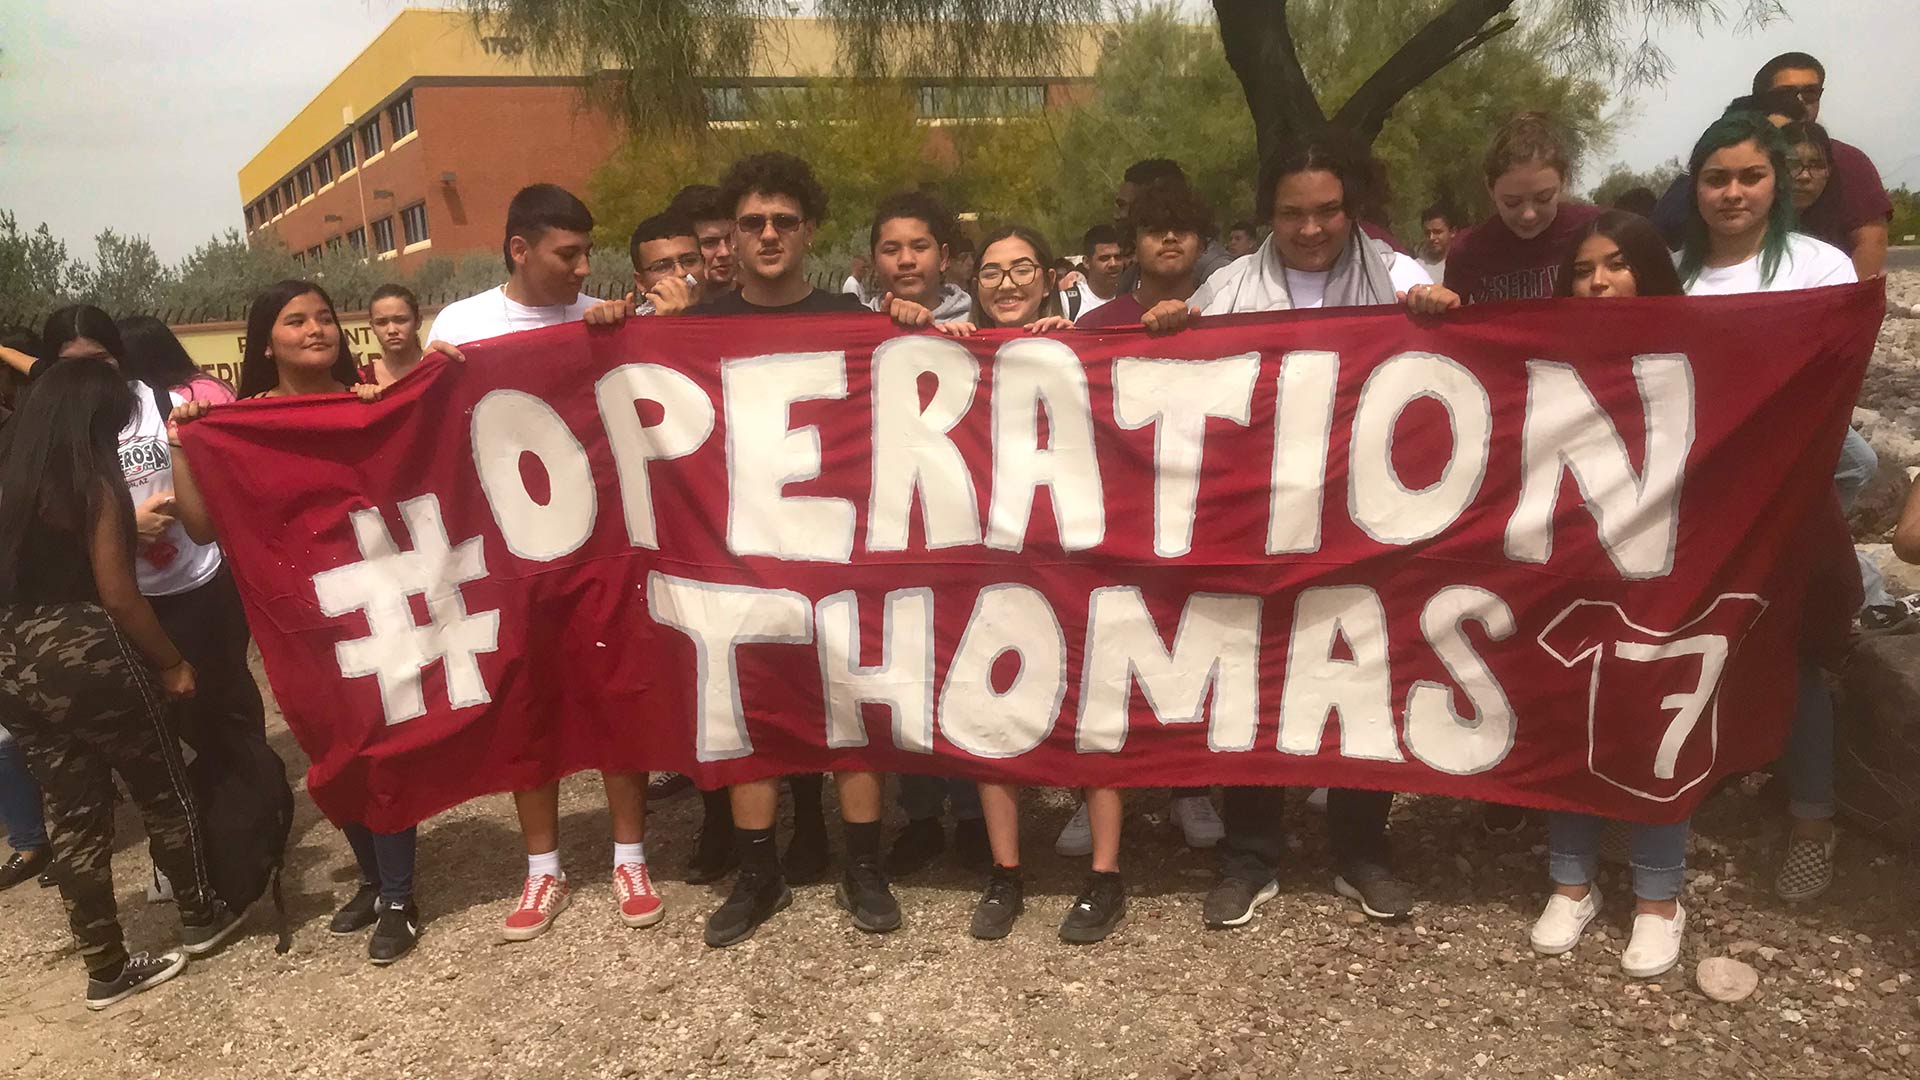 Desert View High School students hold a protest at the Pima County Sheriff's Department on Benson Highway in Tucson. Students walked for two hours to protest the detention of senior classmate Thomas Torres.